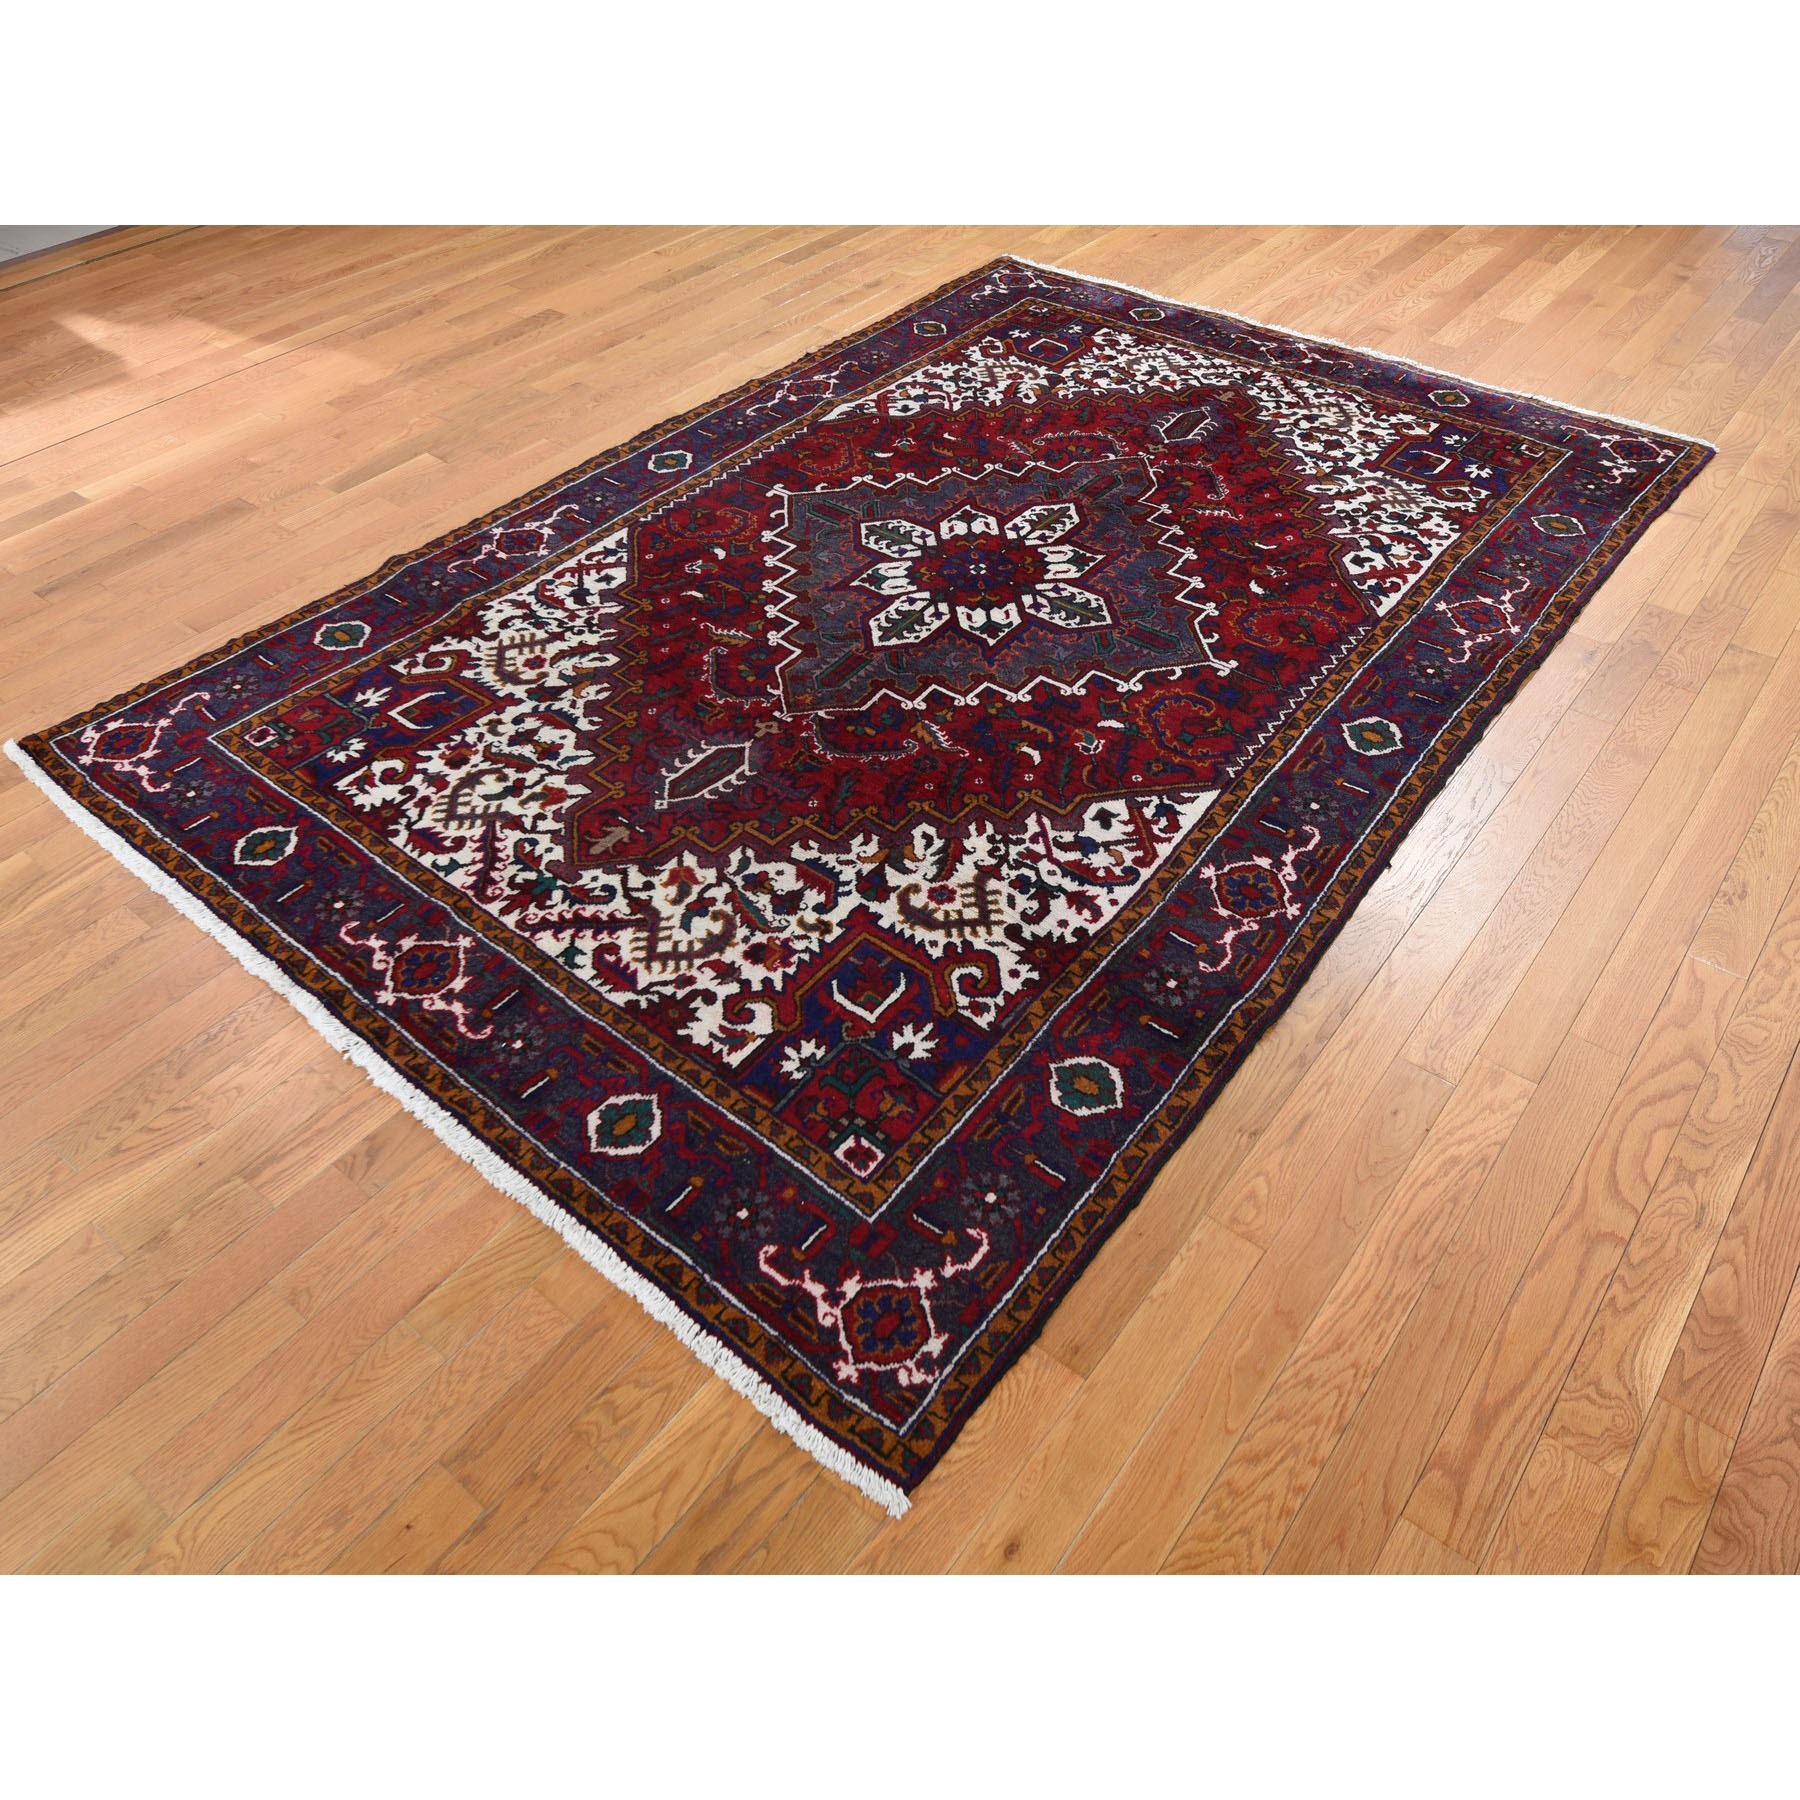 6-6 x9-5  Red Semi Antique Persian Heriz Geometric Design Thick and Plush Hand Knotted Oriental Rug 